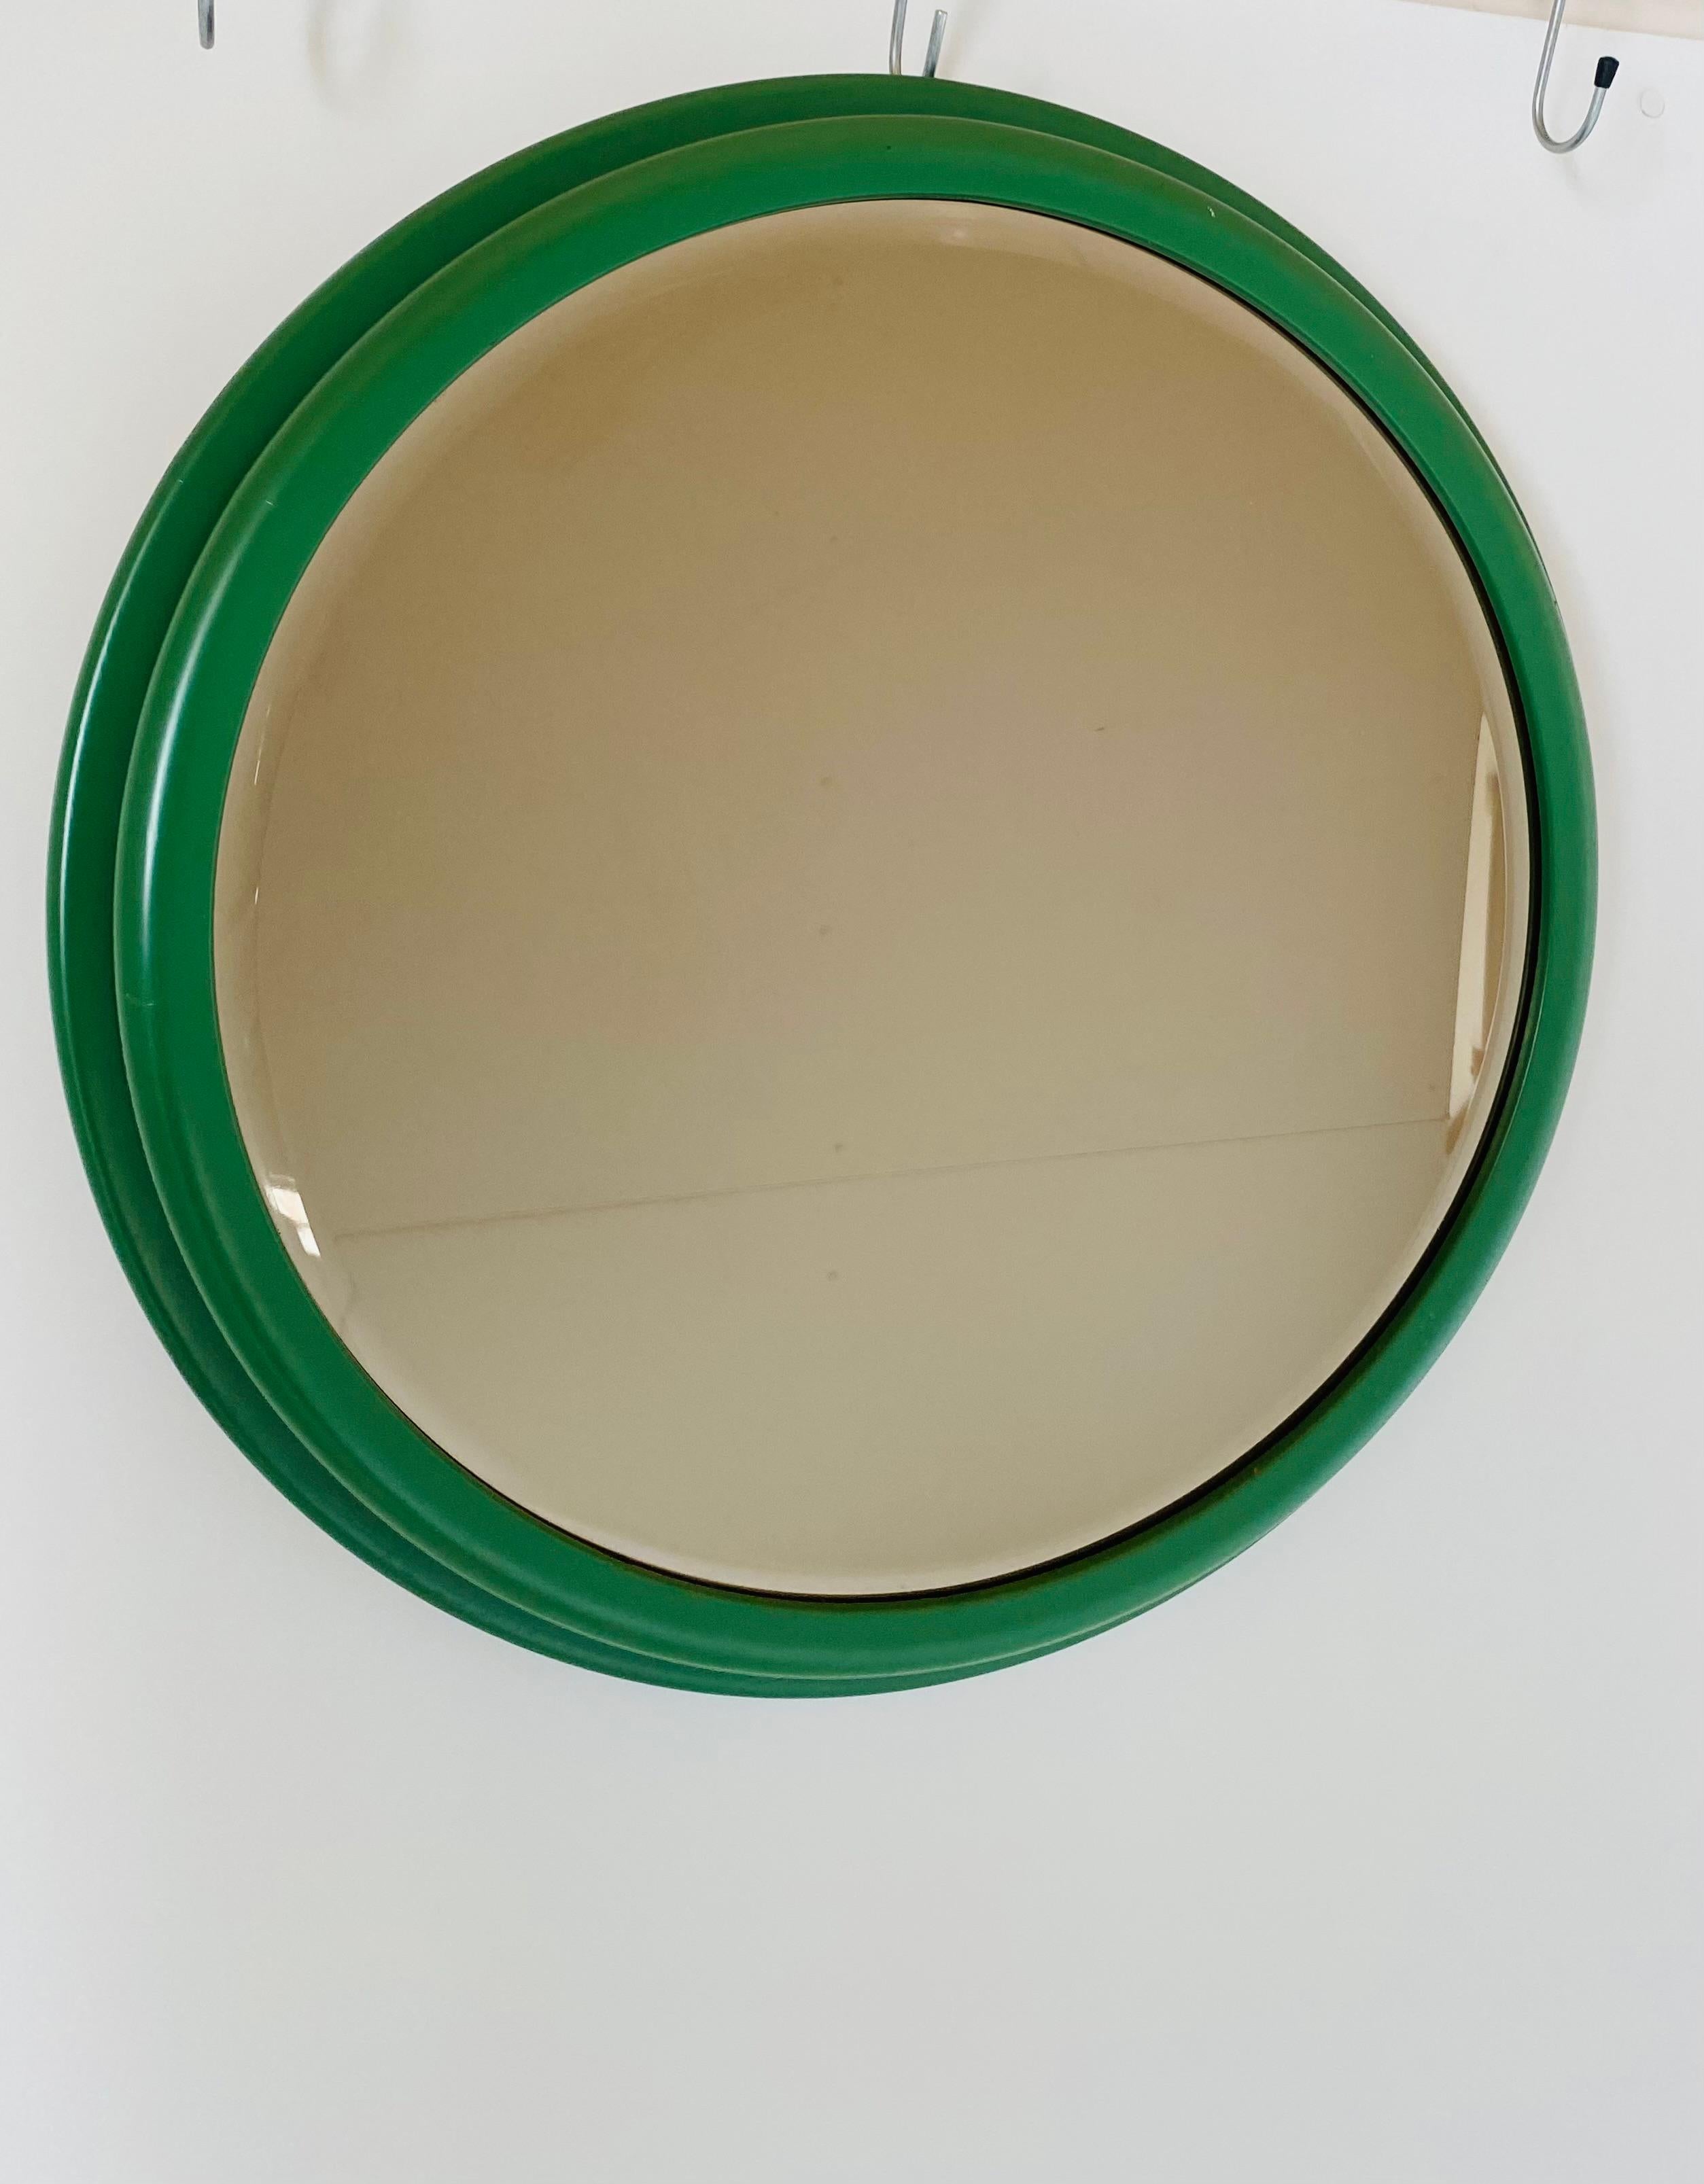 Vintage Green Round Wall Mirror, Italy 1960s.
A 1960s round wall mirror with fine wood frame and cut glass. Produced in Italy. 
In very good conditions with only few signs of time. 

Size(cm): 65 cm diametre.

Please visit our profile page to check